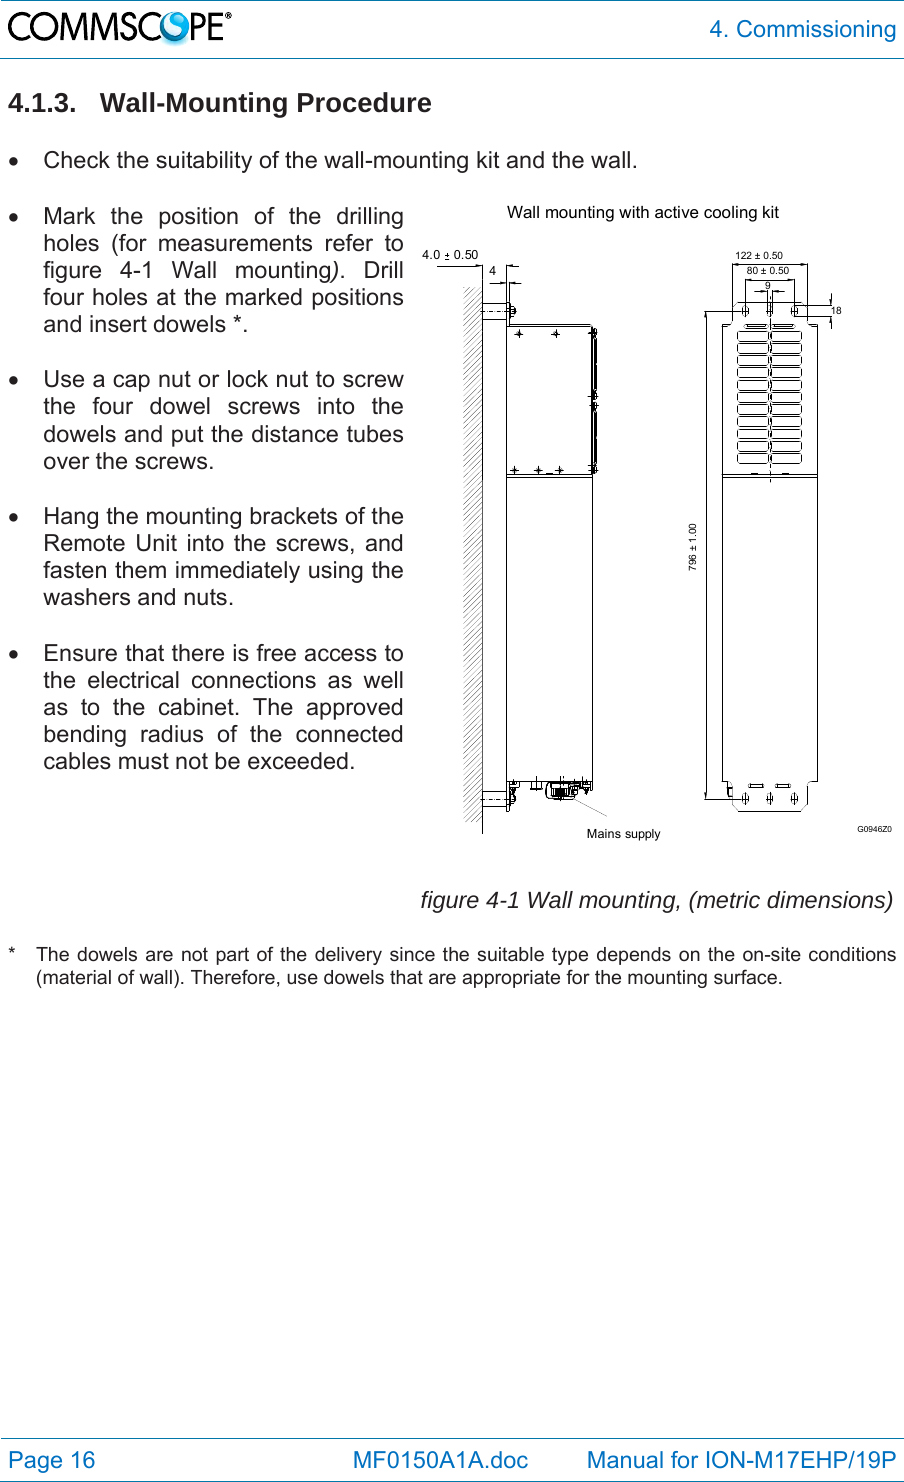  4. Commissioning Page 16            MF0150A1A.doc         Manual for ION-M17EHP/19P 4.1.3. Wall-Mounting Procedure    Check the suitability of the wall-mounting kit and the wall.    Mark the position of the drilling holes (for measurements refer to figure 4-1 Wall mounting). Drill four holes at the marked positions and insert dowels *.    Use a cap nut or lock nut to screw the four dowel screws into the dowels and put the distance tubes over the screws.    Hang the mounting brackets of the Remote Unit into the screws, and fasten them immediately using the washers and nuts.    Ensure that there is free access to the electrical connections as well as to the cabinet. The approved bending radius of the connected cables must not be exceeded.   Wall mounting with active cooling kit4.0  0.504Mains supply980 ± 0.50122 ± 0.5018796 ± 1.00G0946Z0 figure 4-1 Wall mounting, (metric dimensions)*  The dowels are not part of the delivery since the suitable type depends on the on-site conditions (material of wall). Therefore, use dowels that are appropriate for the mounting surface.   